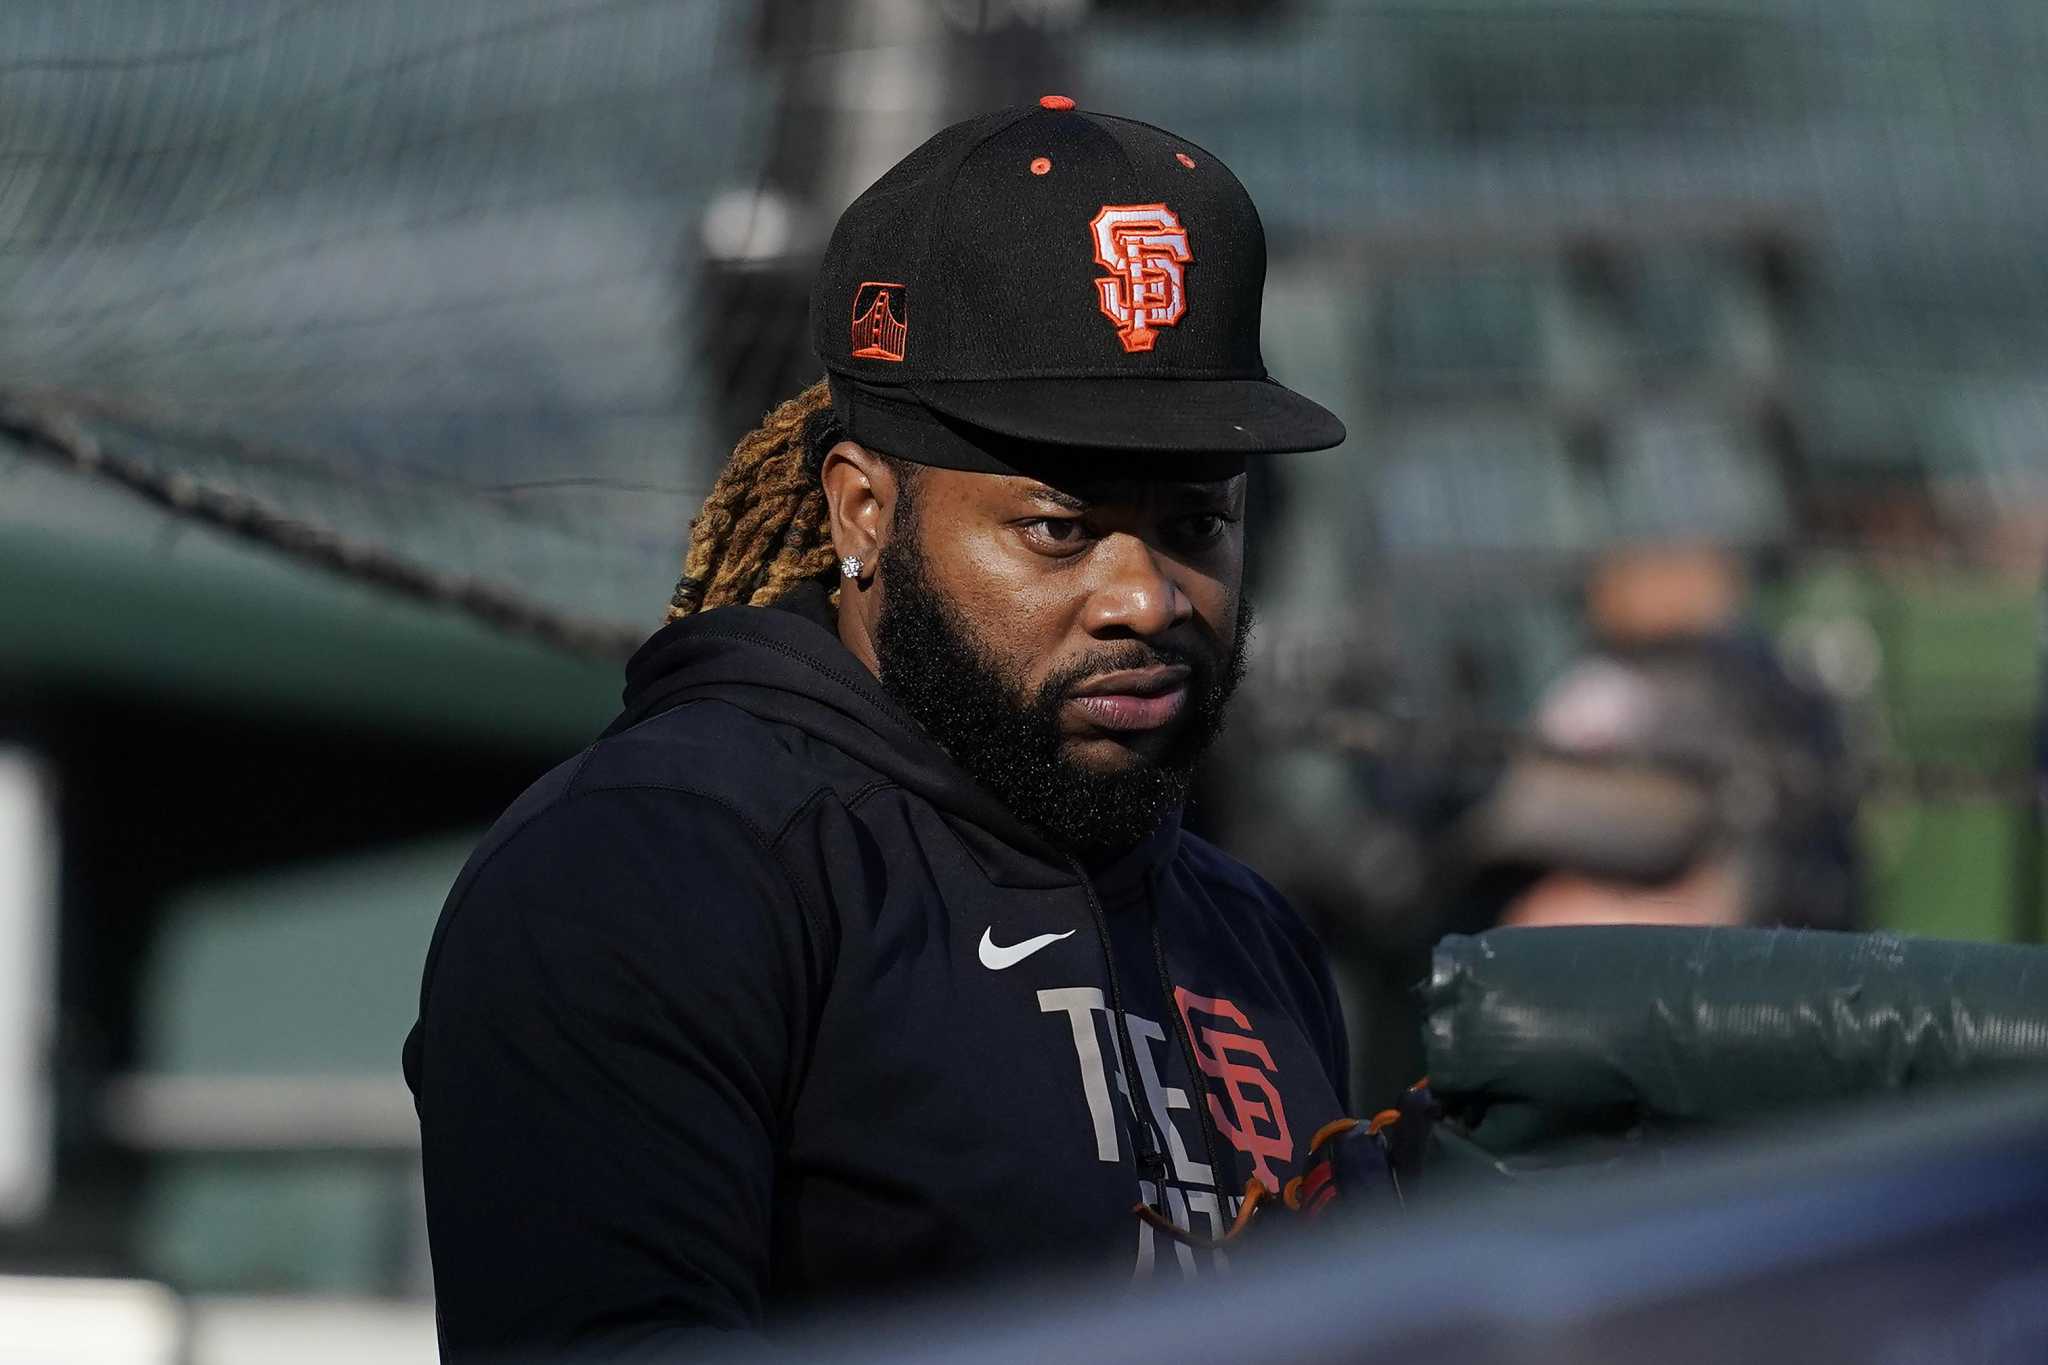 Giants righty Johnny Cueto not on NL Division Series roster - The